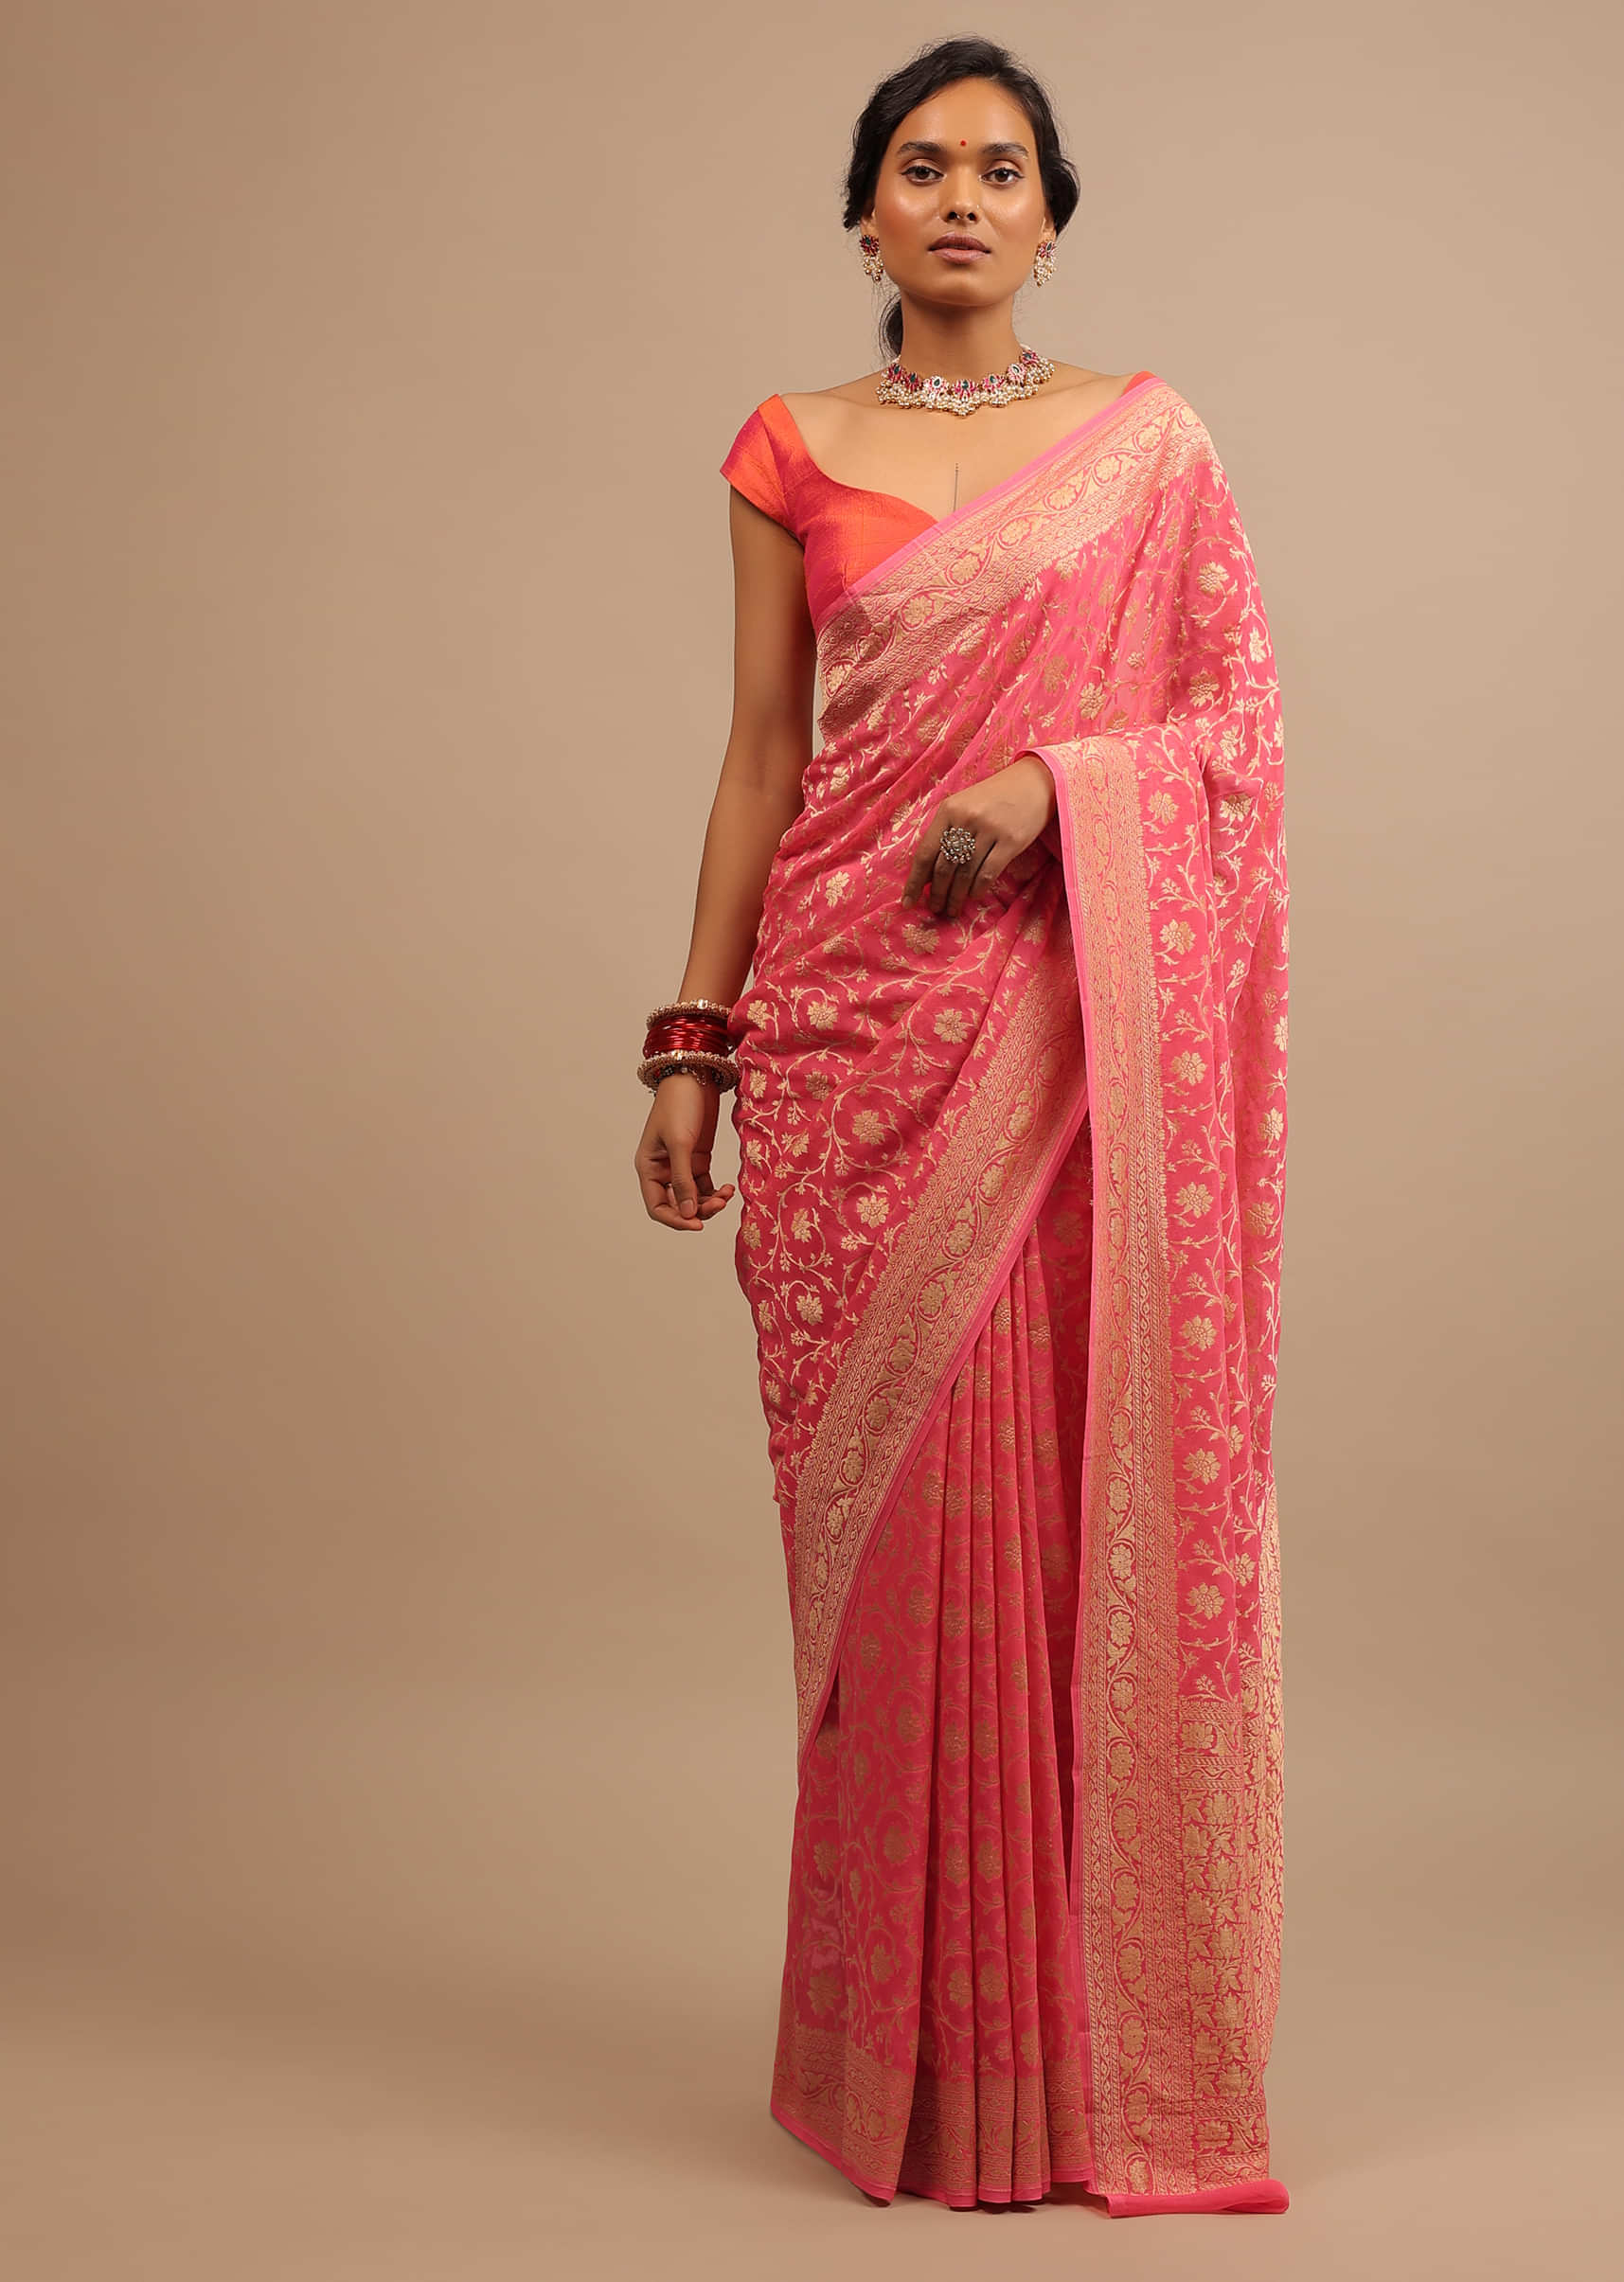 Neon Pink Traditional Georgette Saree With Golden Jaal Work In Floral Motif